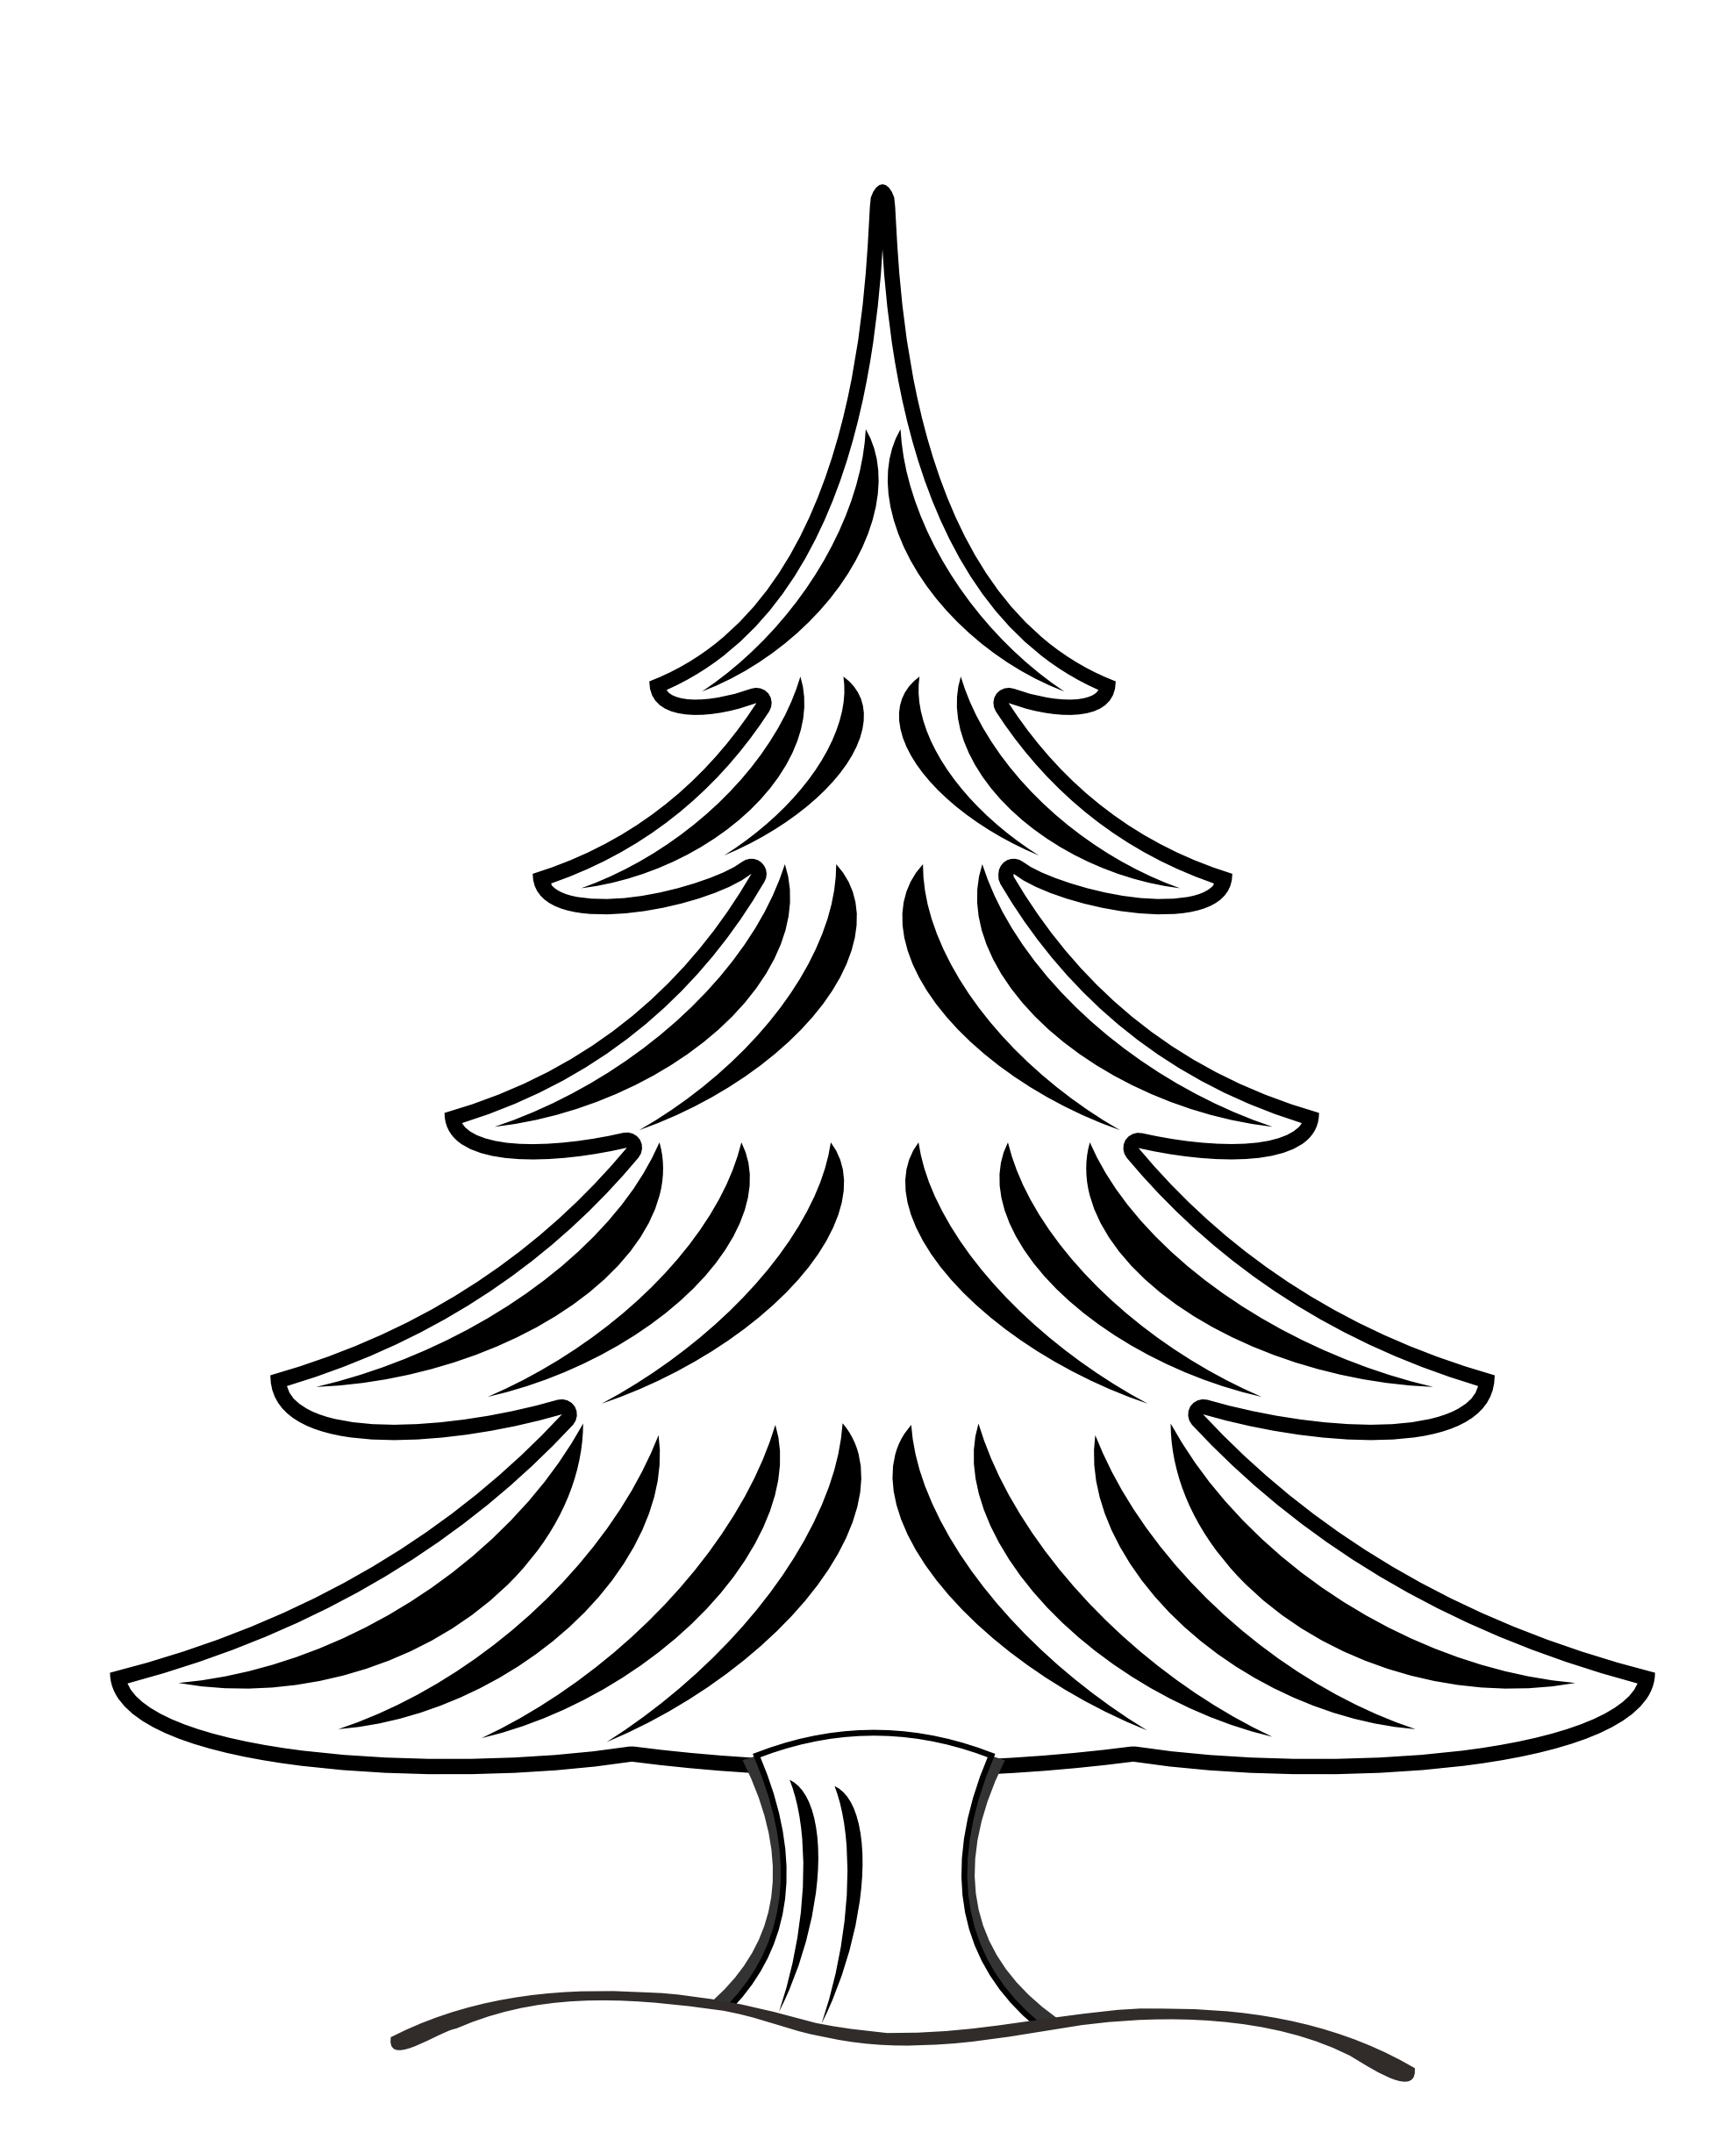 Pine tree clip art black and white clipart image 2